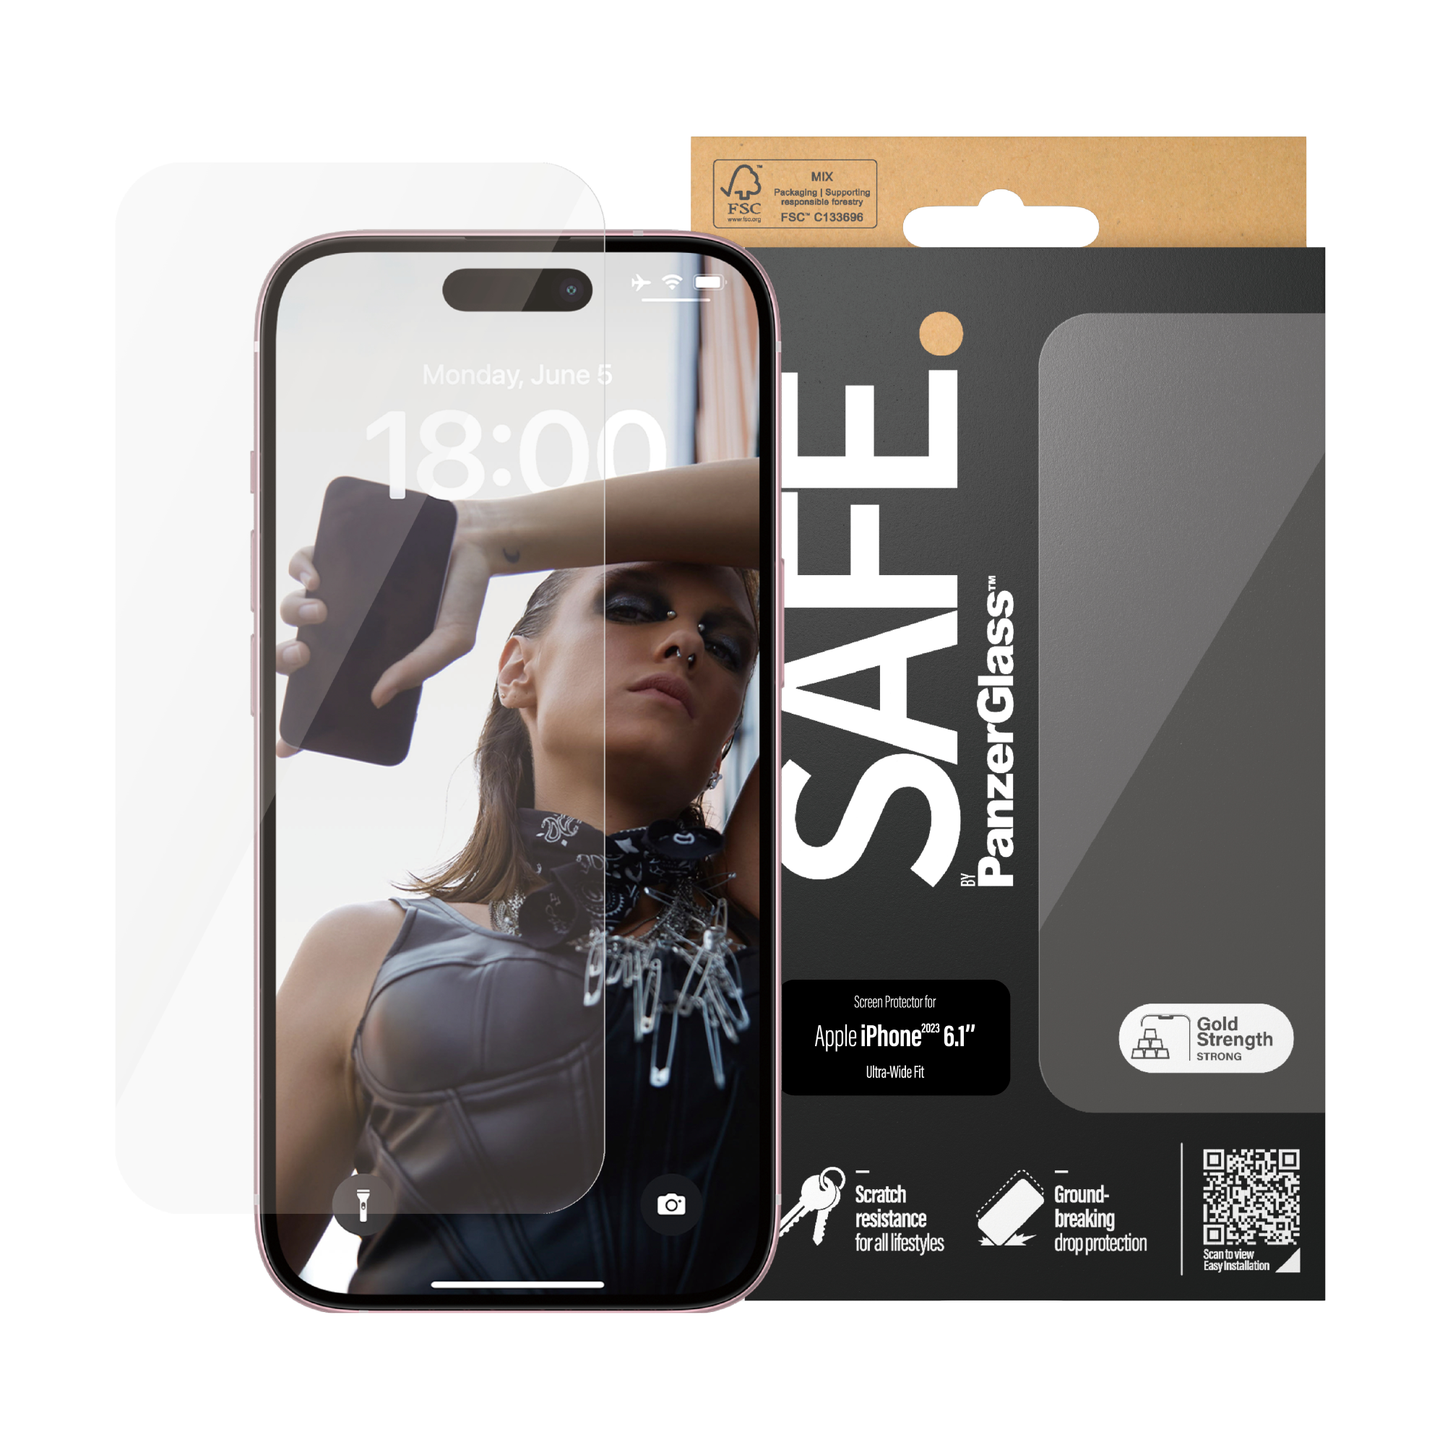 SAFE. Tempered Glass Screen Protector for iPhone